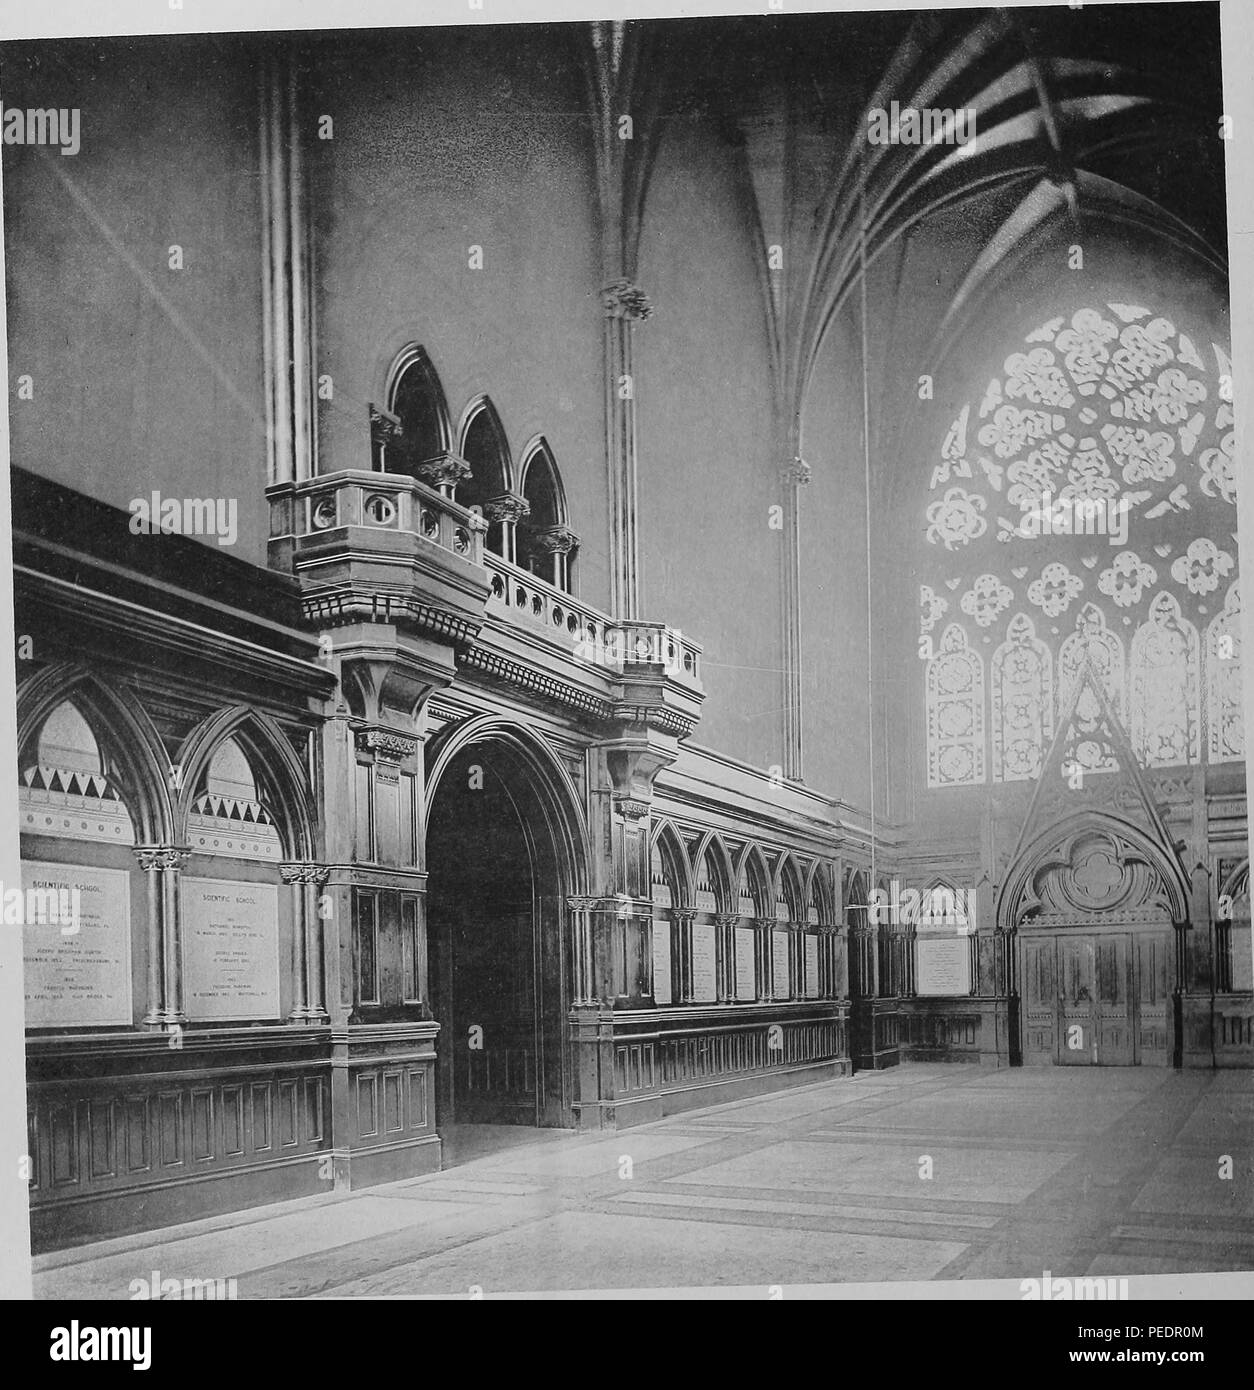 Black and white photograph showing an interior view, looking toward the south door and windows of the Memorial Transept at Memorial Hall, a late 19th-century Gothic revival building built to honor Harvard men who died in the Civil War, located north of Harvard Yard in Cambridge Massachusetts, 1875. Courtesy Internet Archive. () Stock Photo